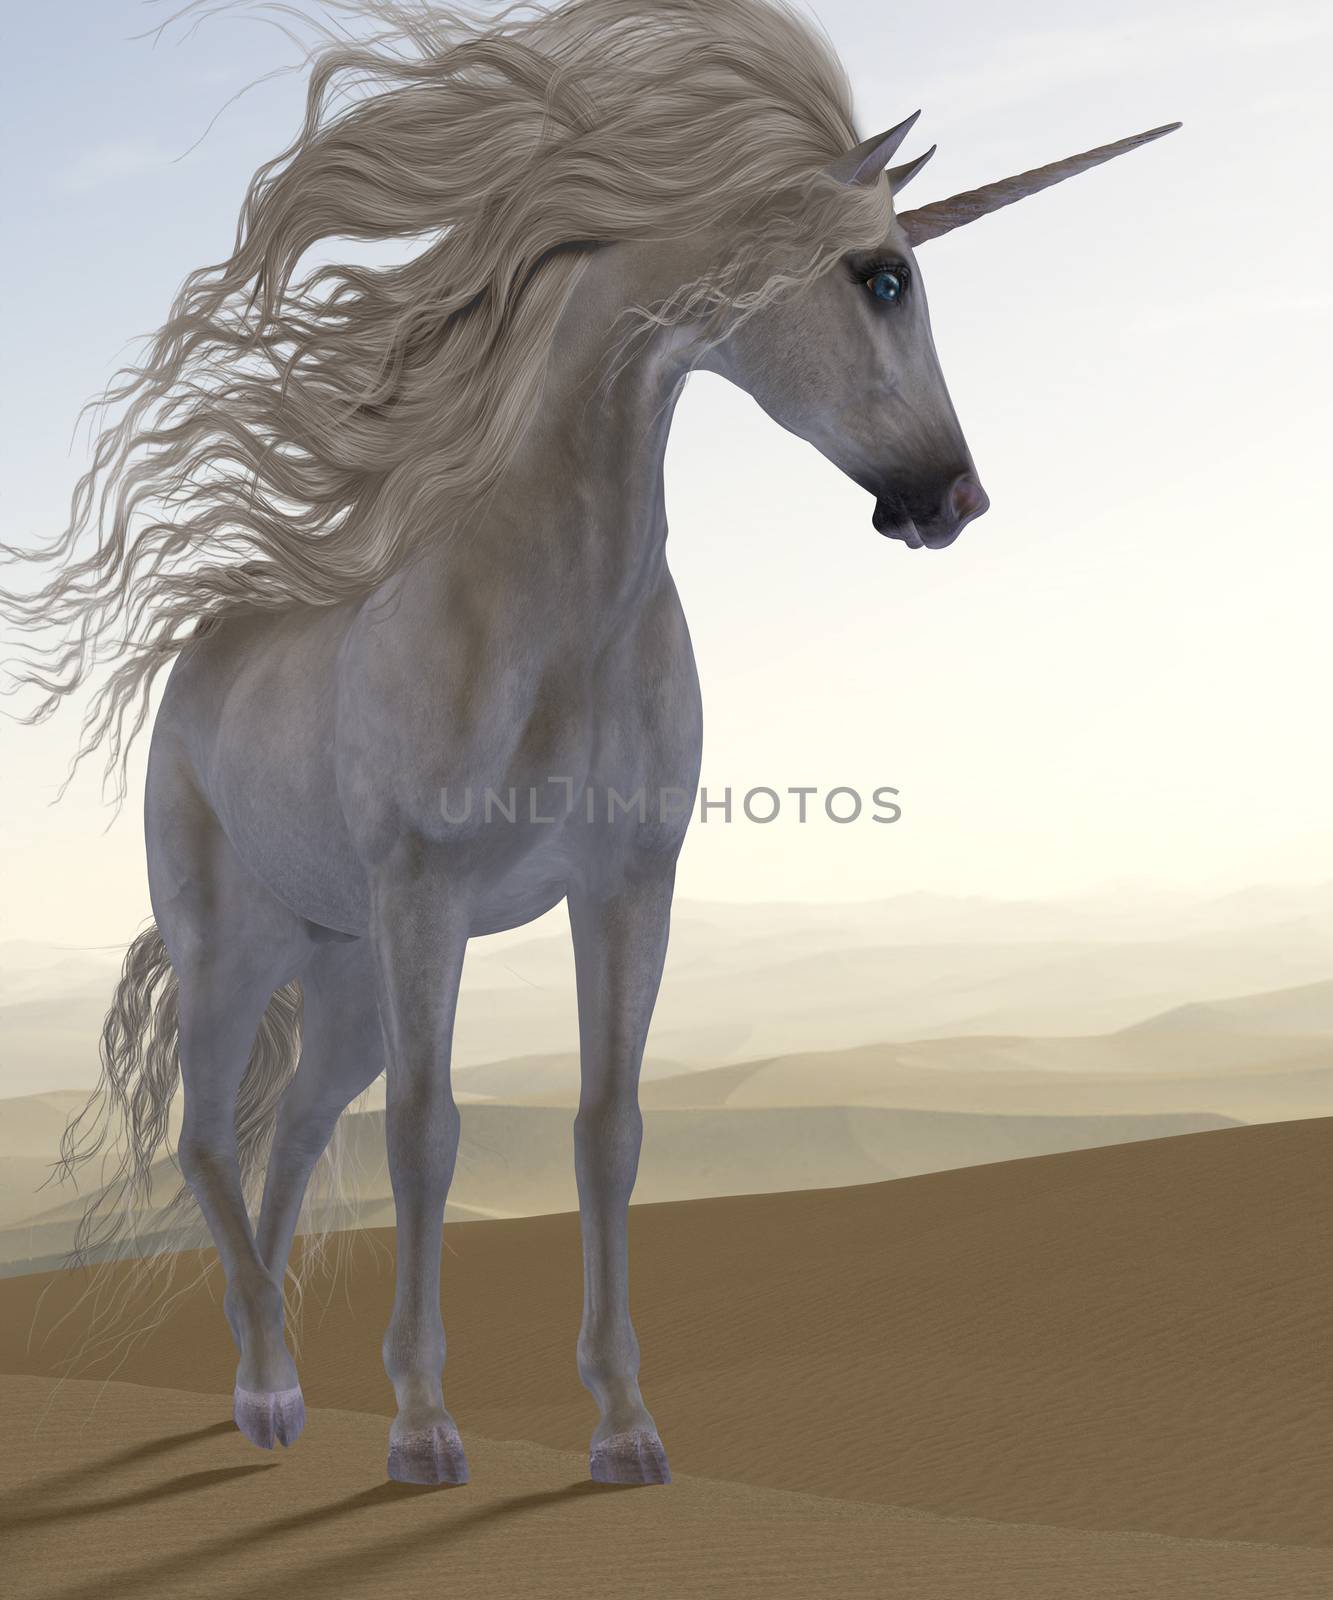 A Unicorn is a creature of fantasy and mythology which has a horn on its head and cloven hooves.